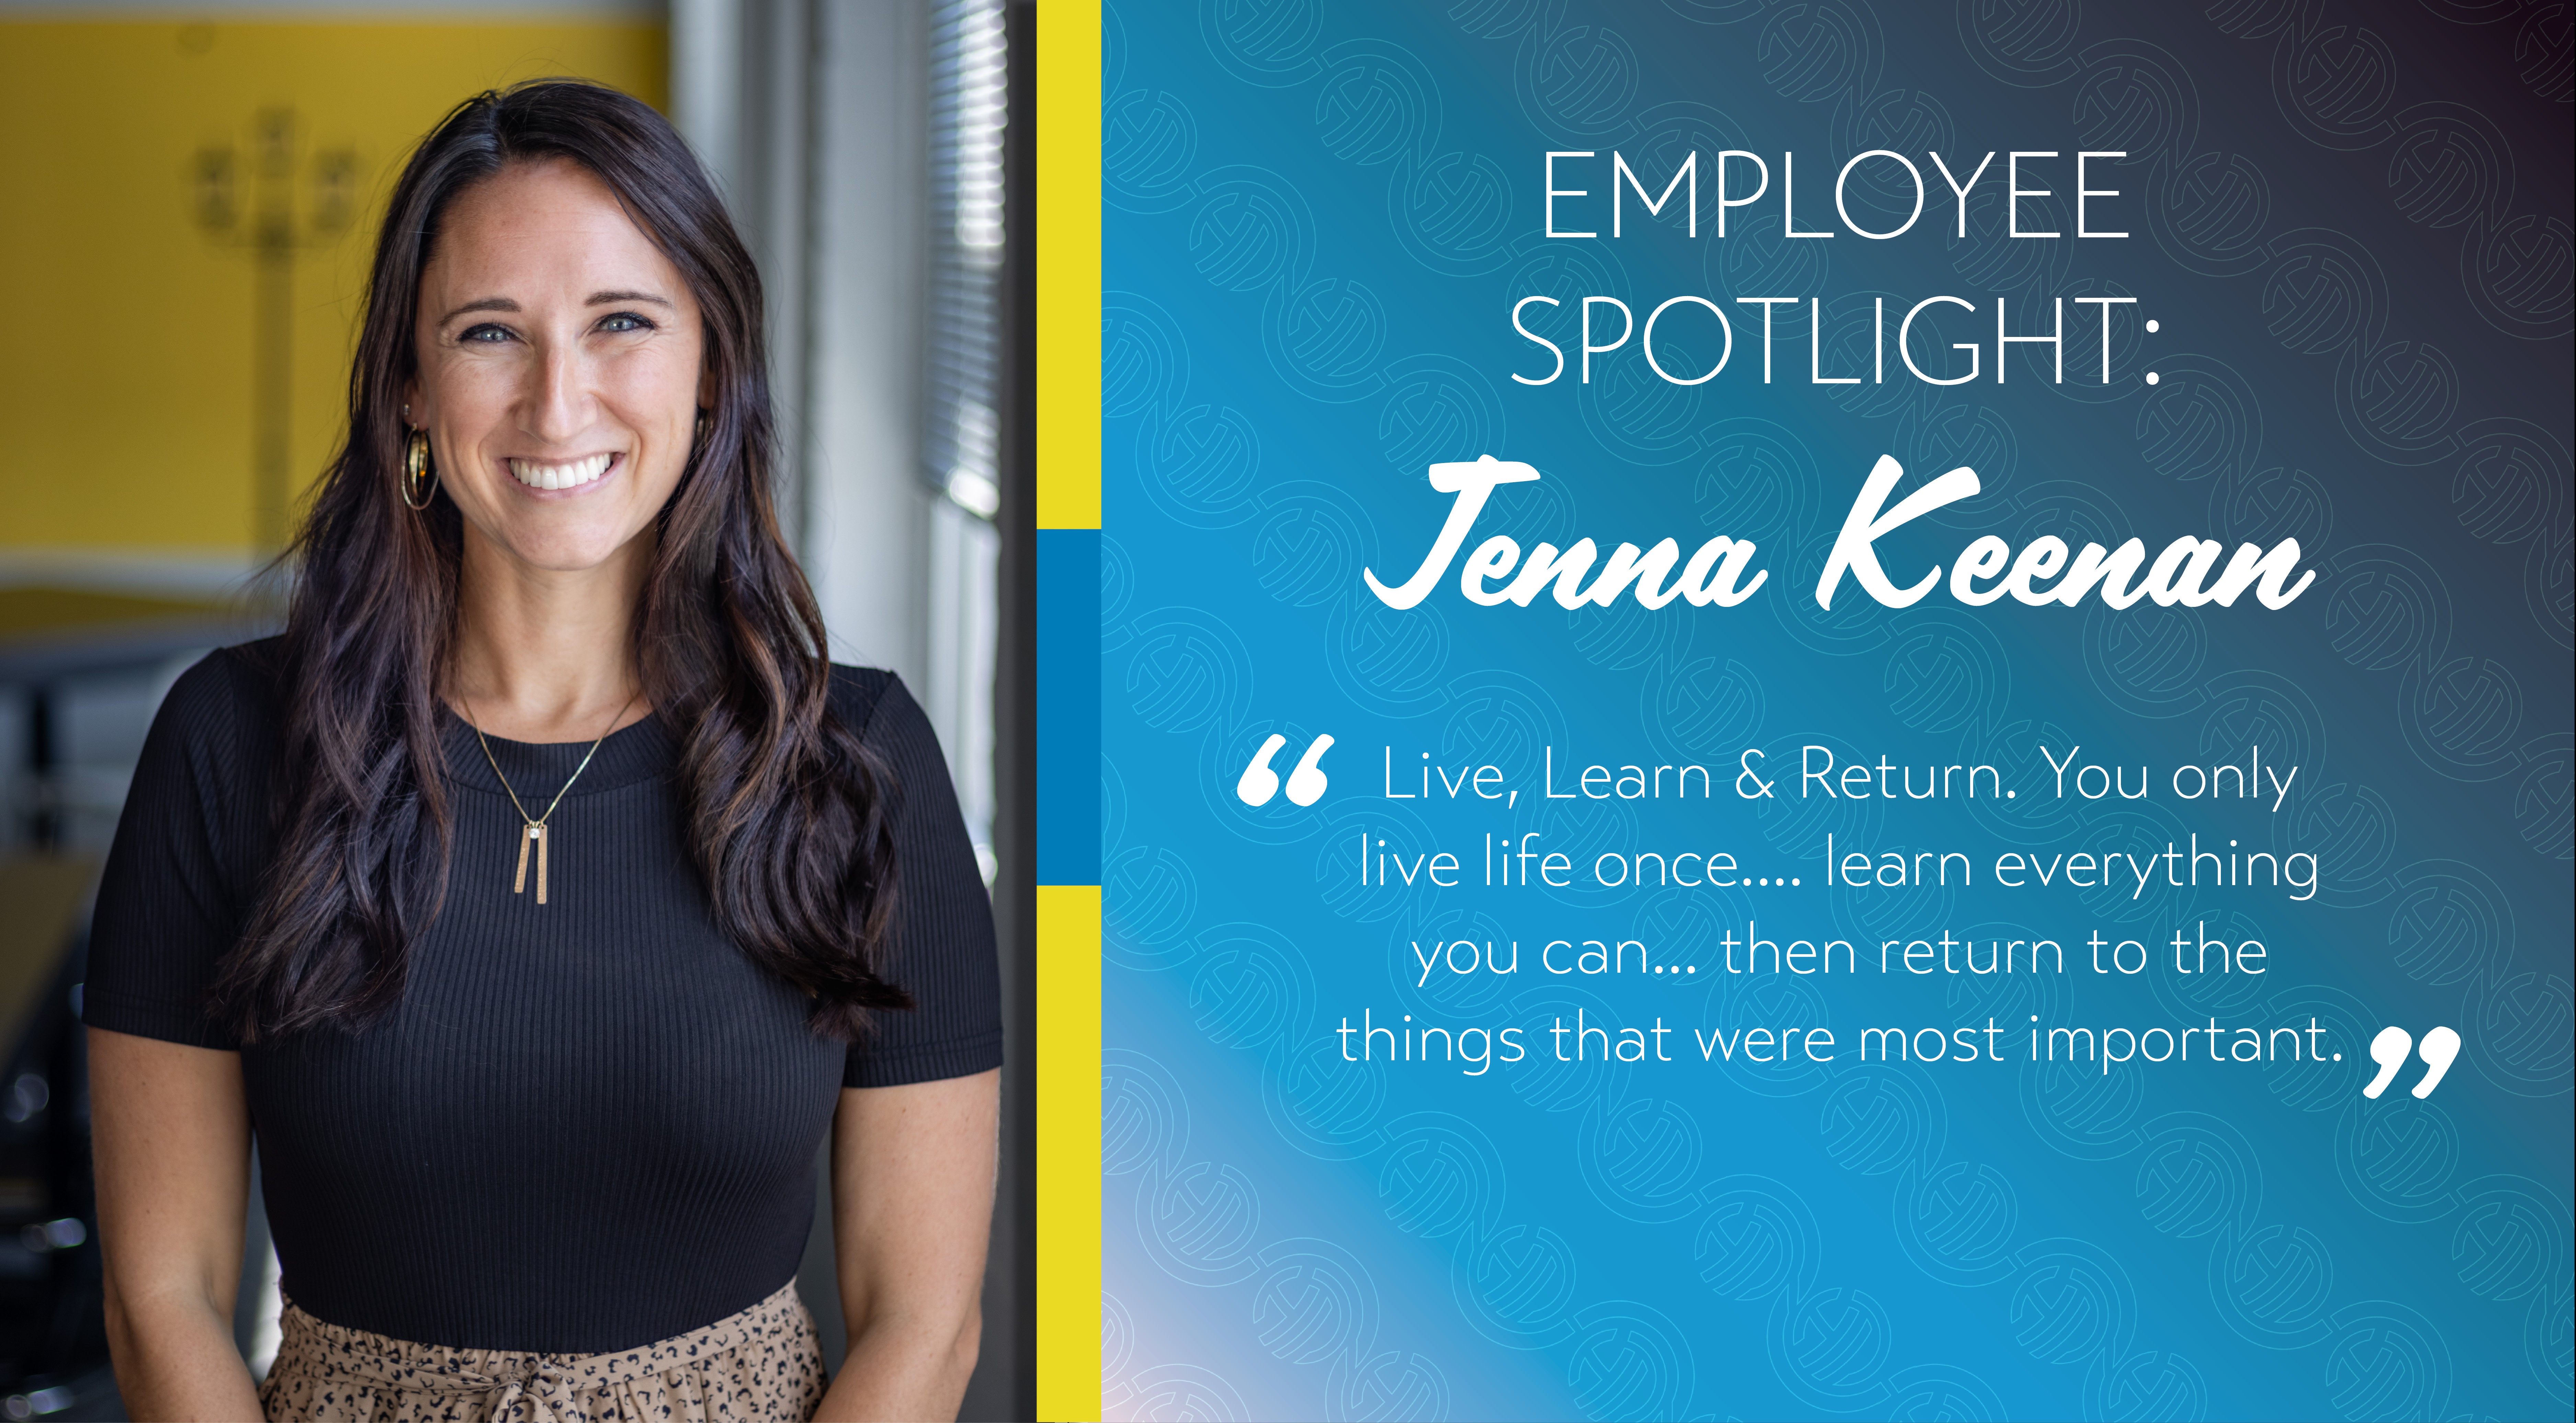 Jenna Keenan's corporate headshot next to her quote from inside the article